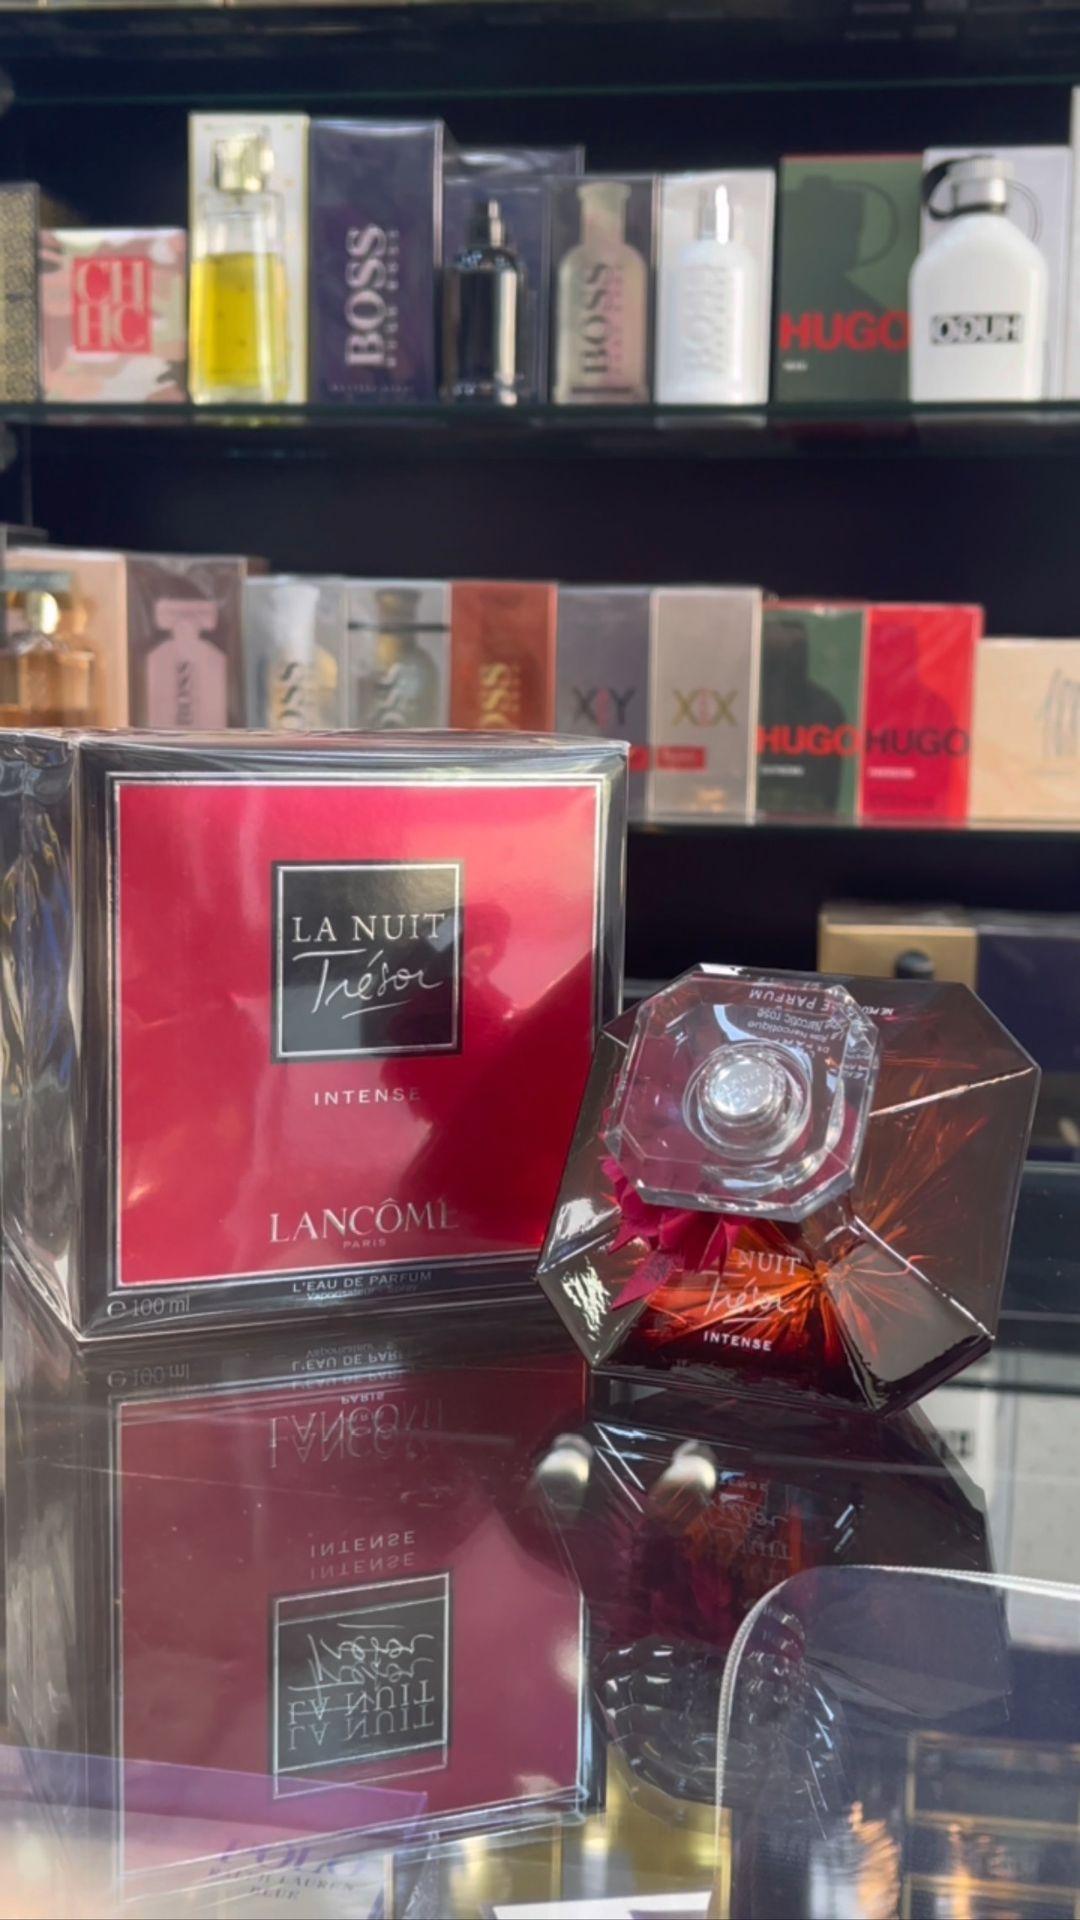 class="content__text"
 Lancome Lanoi Tresor Intense Eau de Parfum for women

 ⠀
 Perfume Size: 100 ML ⠀
 price: 39.500 BD ⠀
 ⠀
 Contact Numbers &amp; Whatsapp: ⠀⠀
 Budaiya ☎️📱 +973 77400041⠀
 Dumistan ☎️📱+973 77008551⠀
 ⠀
 🌐 You can buy it through the website in the bio.⠀
 🎁 Free packaging service.⠀
 🚗 Delivery service is available.⠀

 ⠀
 Product Description:⠀

 Released in 2022. Top note is damask rose; middle note is sour cherry; base notes are almond milk, madagascar vanilla and woody notes.

 ⠀
 To search for Lancome perfumes, click the hashtag:⠀
 #Revan_Lancome⠀
 ⠀
 To search for women's perfumes, click the hashtag:⠀
 #Revan_Women⠀
 ⠀

لمتابعة حساب العطور باللغة العربية:
@revan.rose.perfumes 

 #french_perfume #my_mini_perfume #perfume #original_perfume #perfume #women_perfume #perfume #french_perfume #men_perfume #perfume_for_sale #brand_perfume #french_perfume #women_perfume #original_perfume #Bahrain #fixed_perfume #mini_perfume #brand_perfume #french_perfume 
 